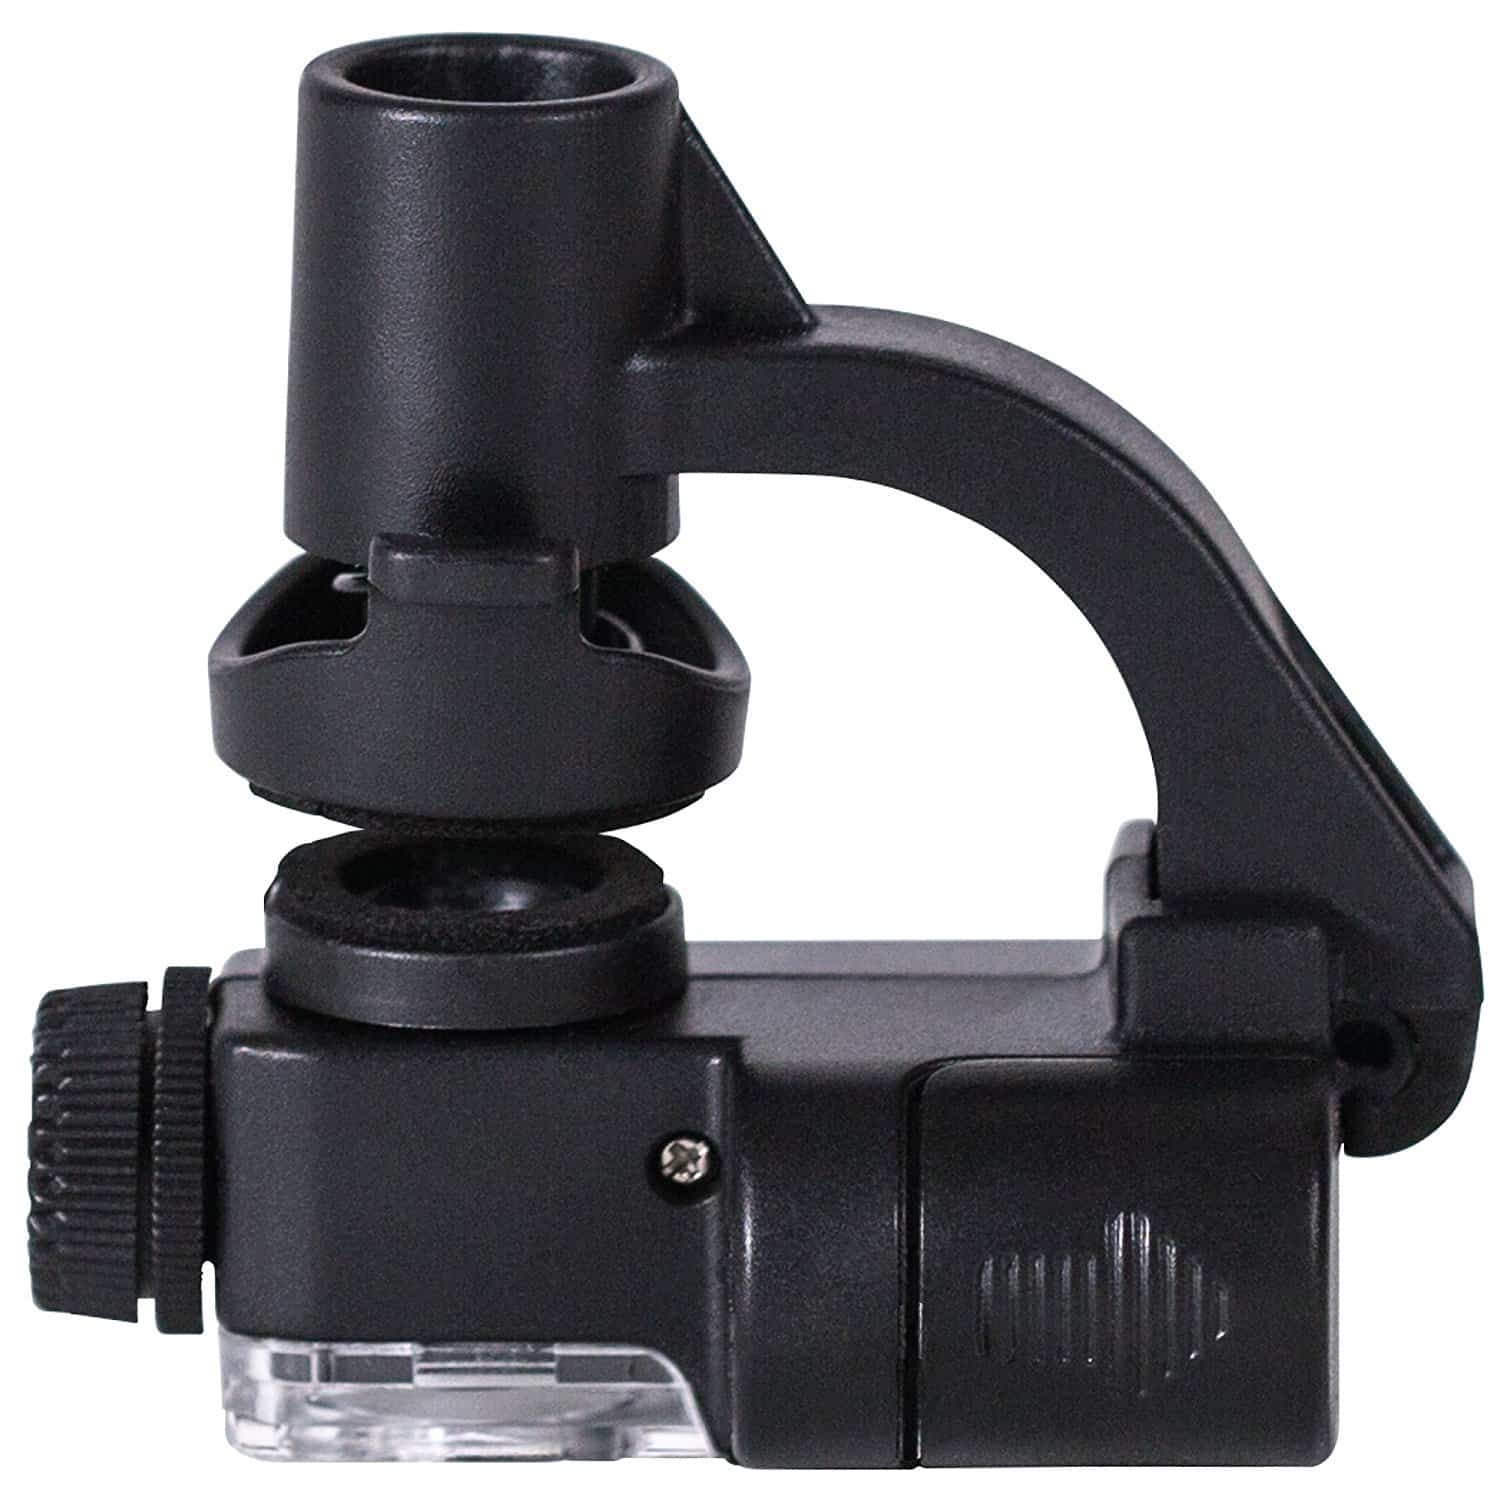 DEAL ALERT: National Geographic Smart Phone Microscope – 47% off!